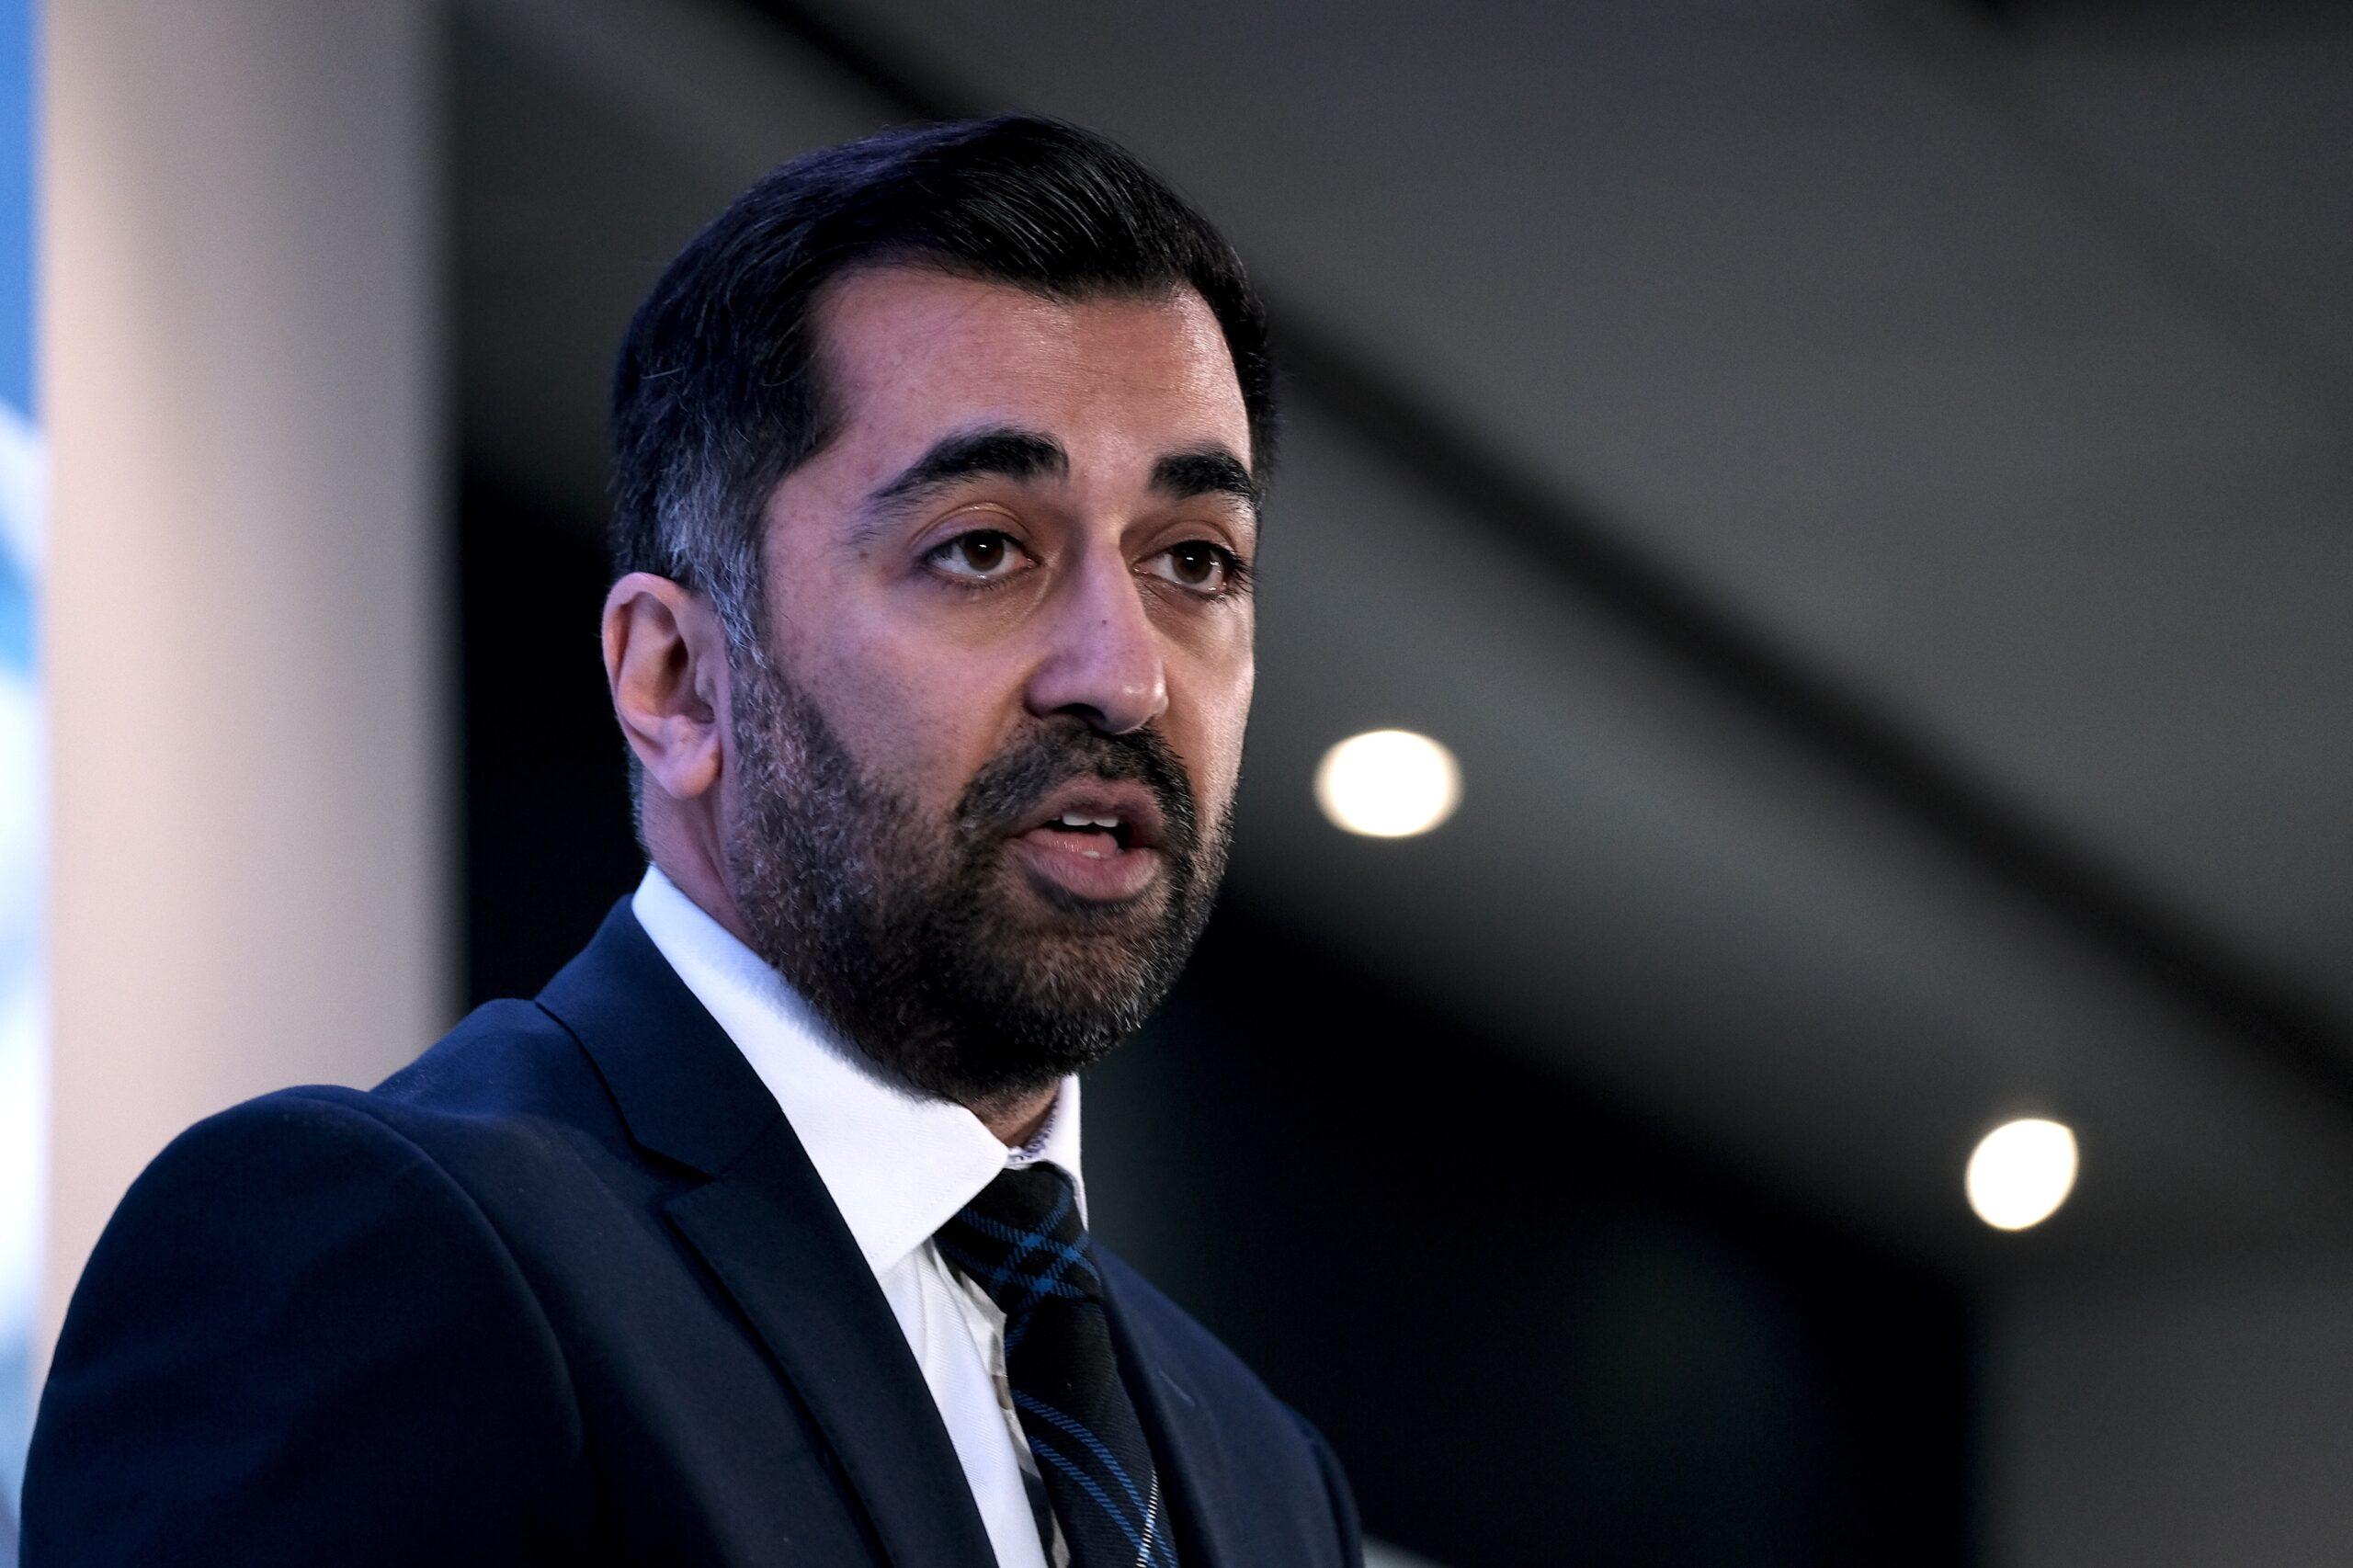 Humza Yousaf on 27 March 2023. Photo by Altopix, copyright Shutterstock